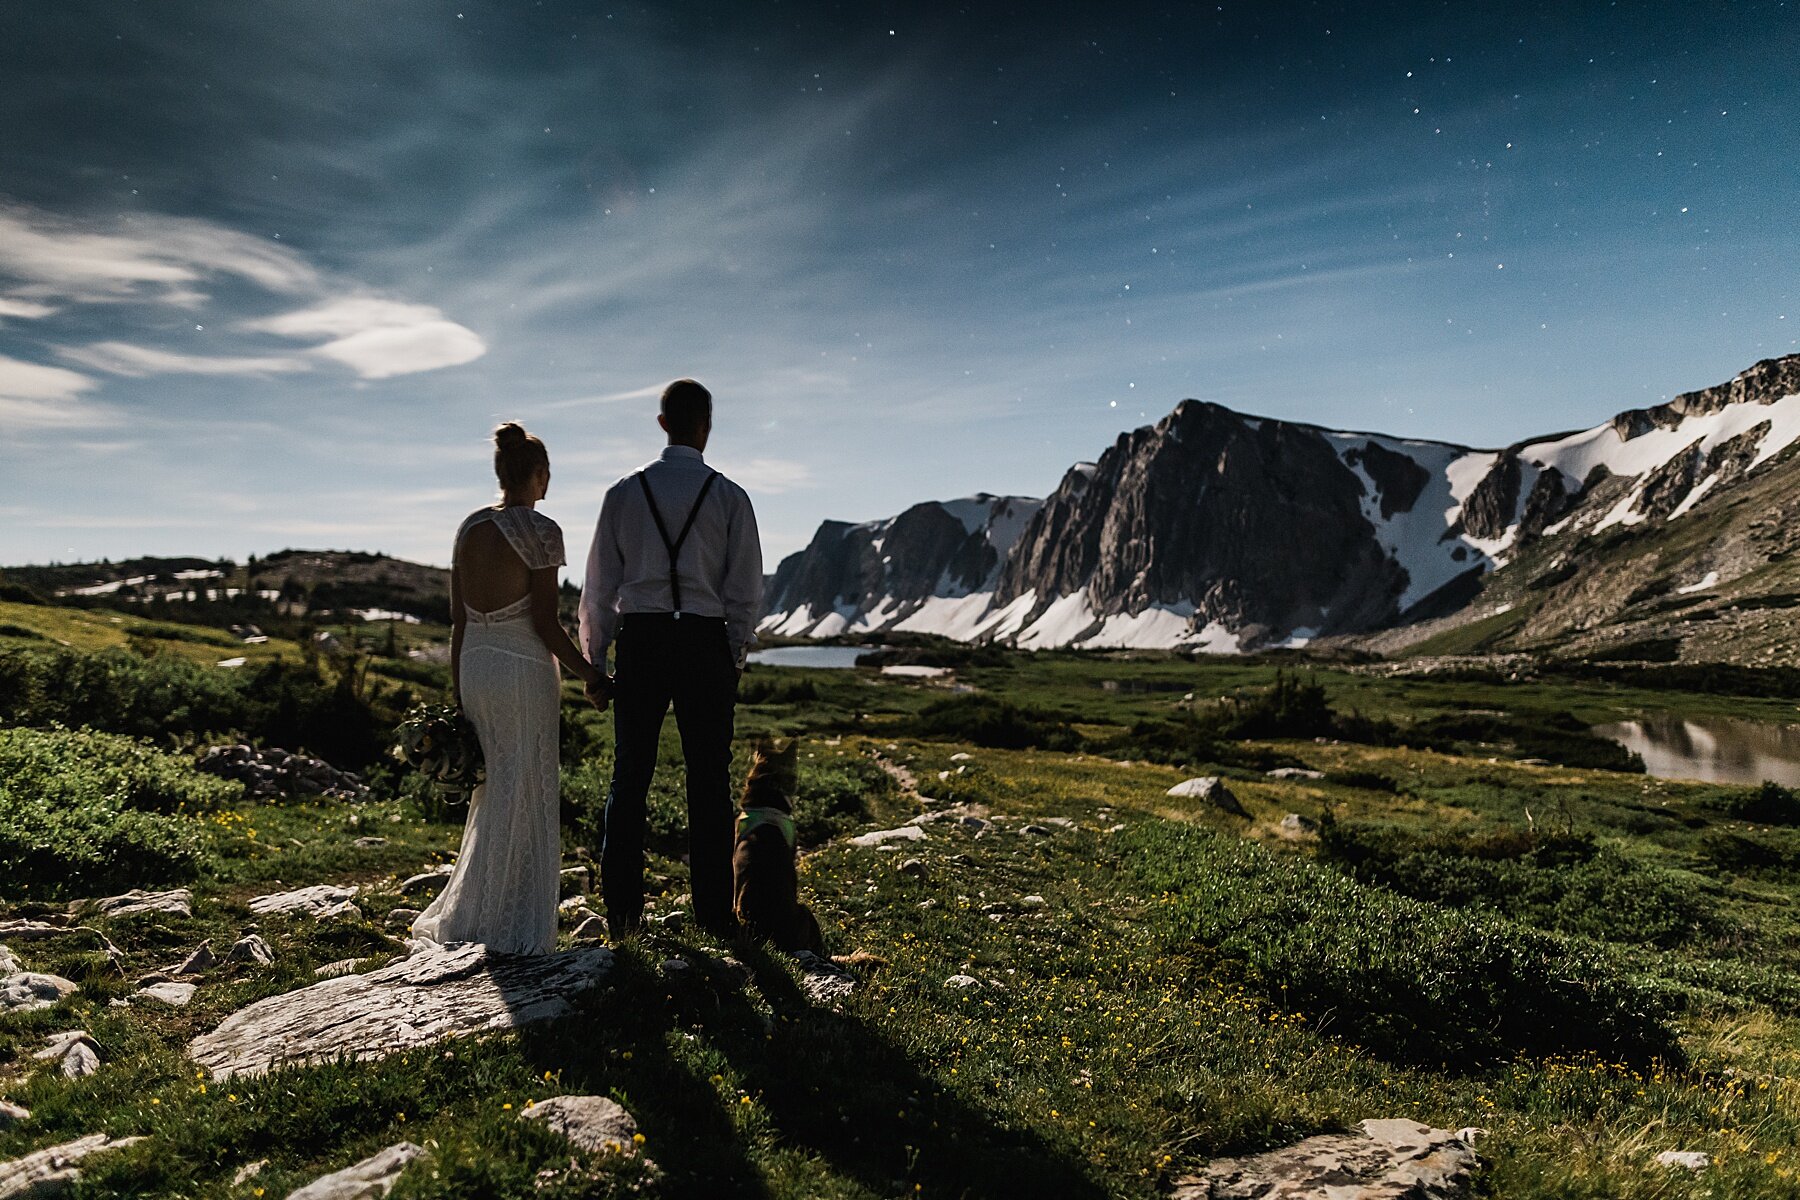 Sunrise Wyoming Hiking Elopement | Vow of the Wild